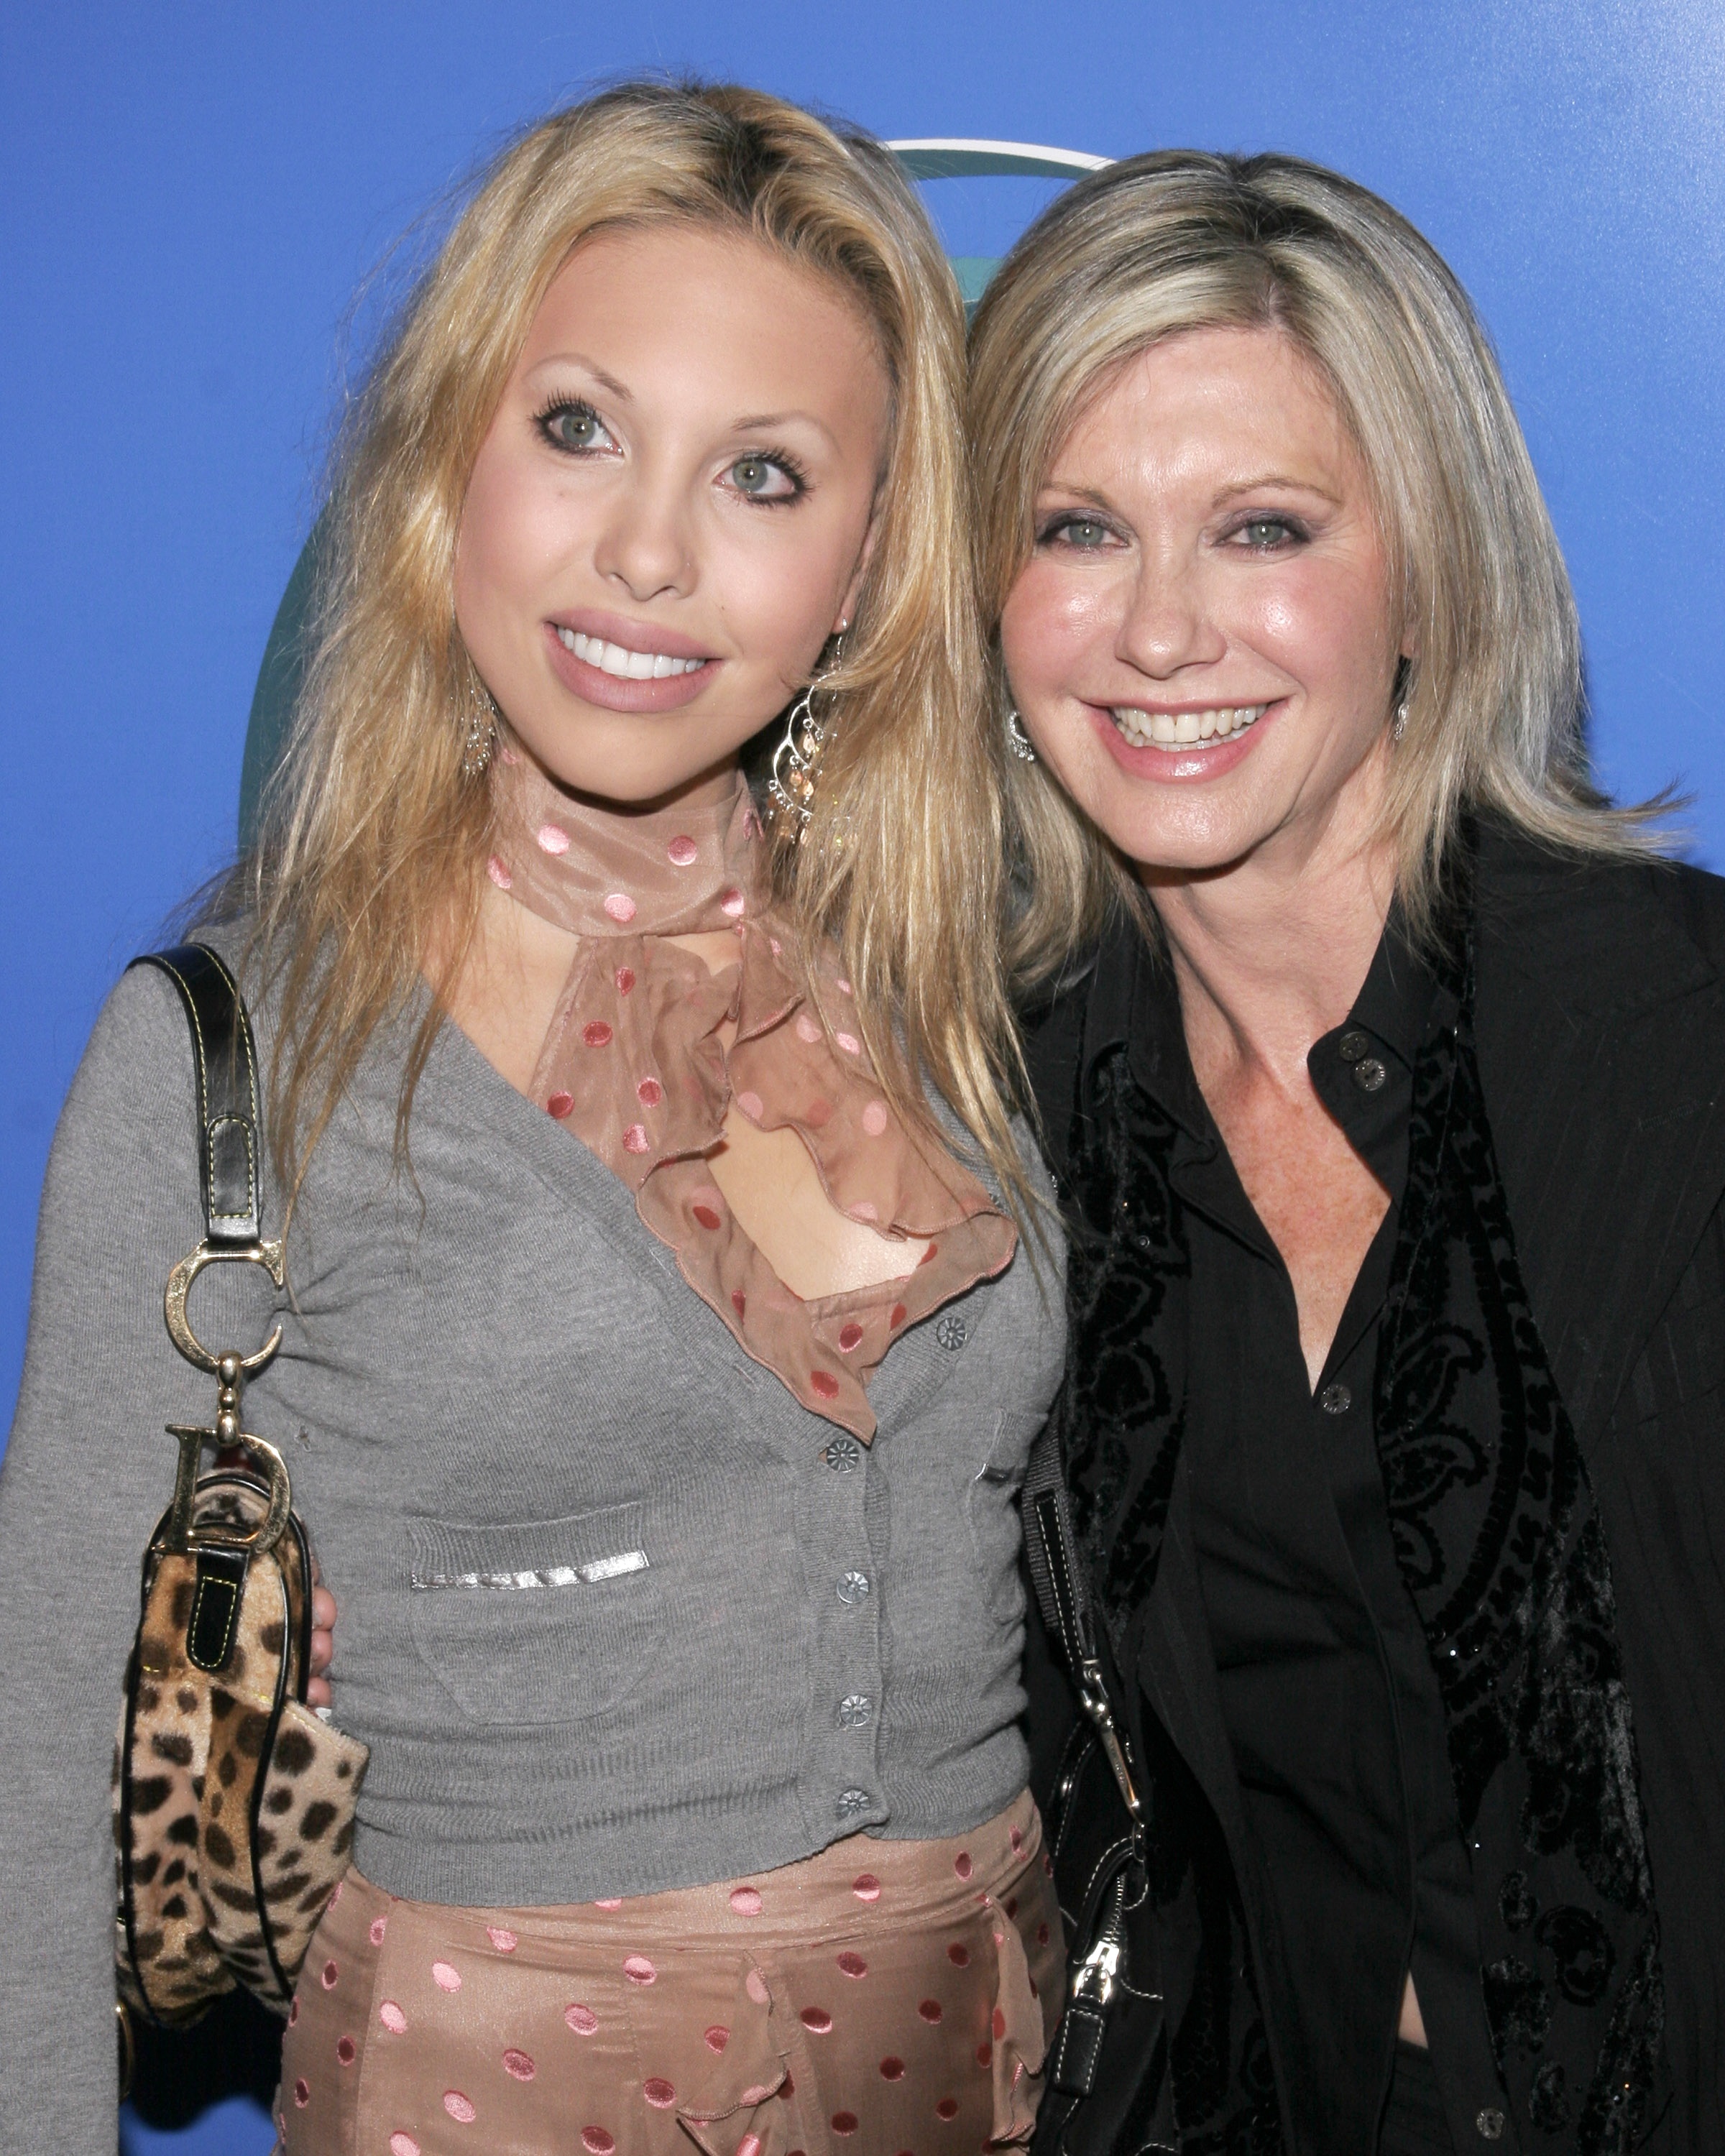 Olivia Newton John andnher daughter Chloe at the Grammy Jam event in Los Angeles in 2005 | Source: Getty Images